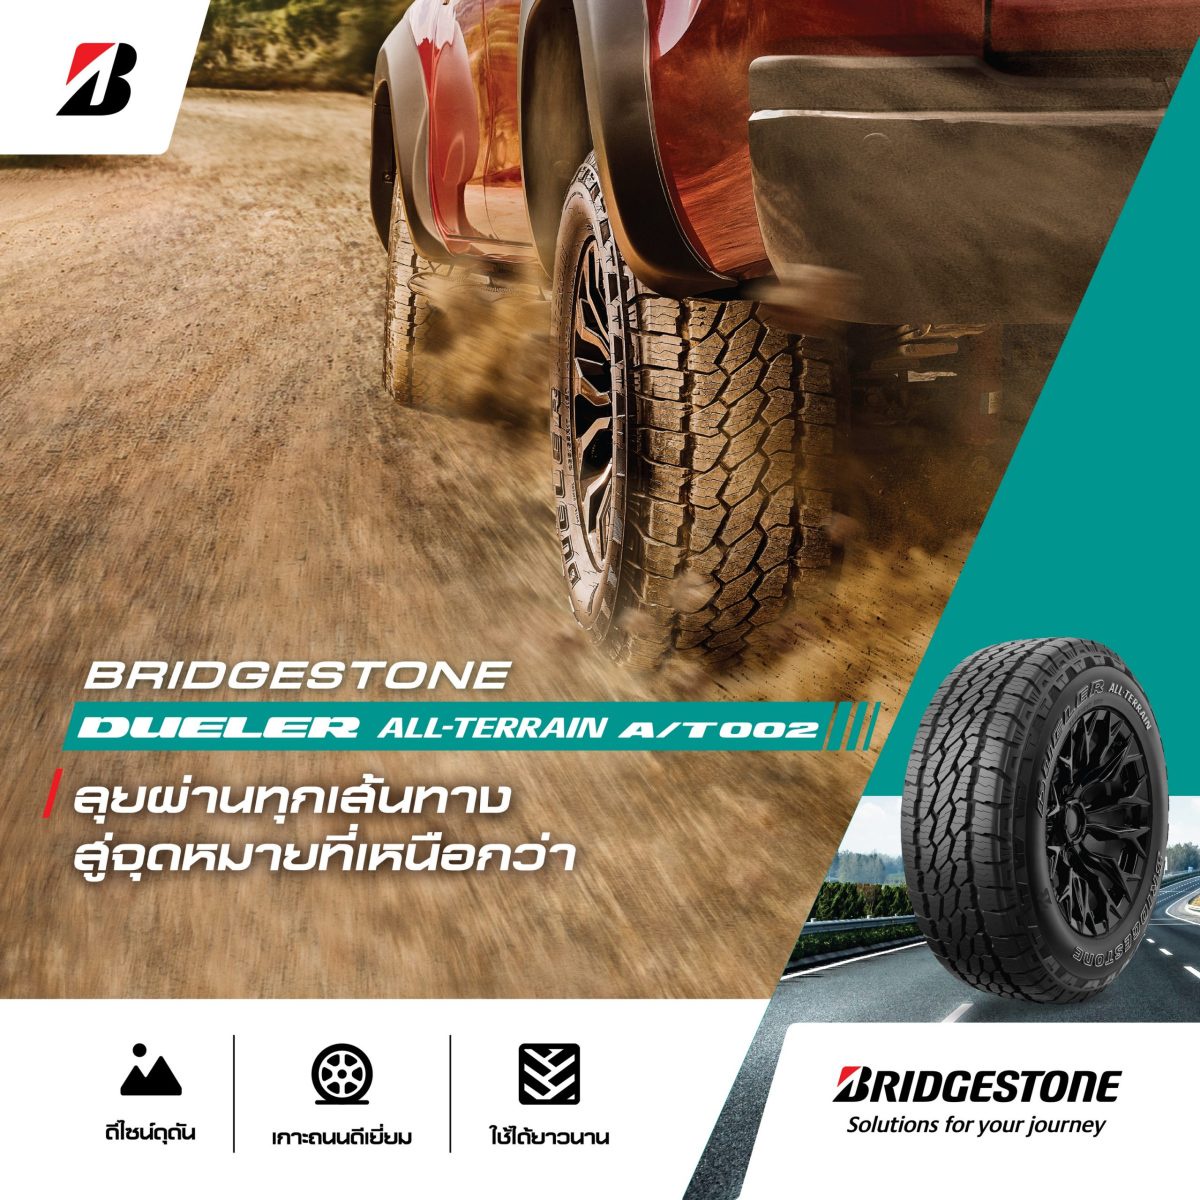 Bridgestone Delivers Utmost High-Performance Driving Experience On-Road Off-Road with Premium All-Terrain Tire, BRIDGESTONE DUELER ALL-TERRAIN A/T002 in 10